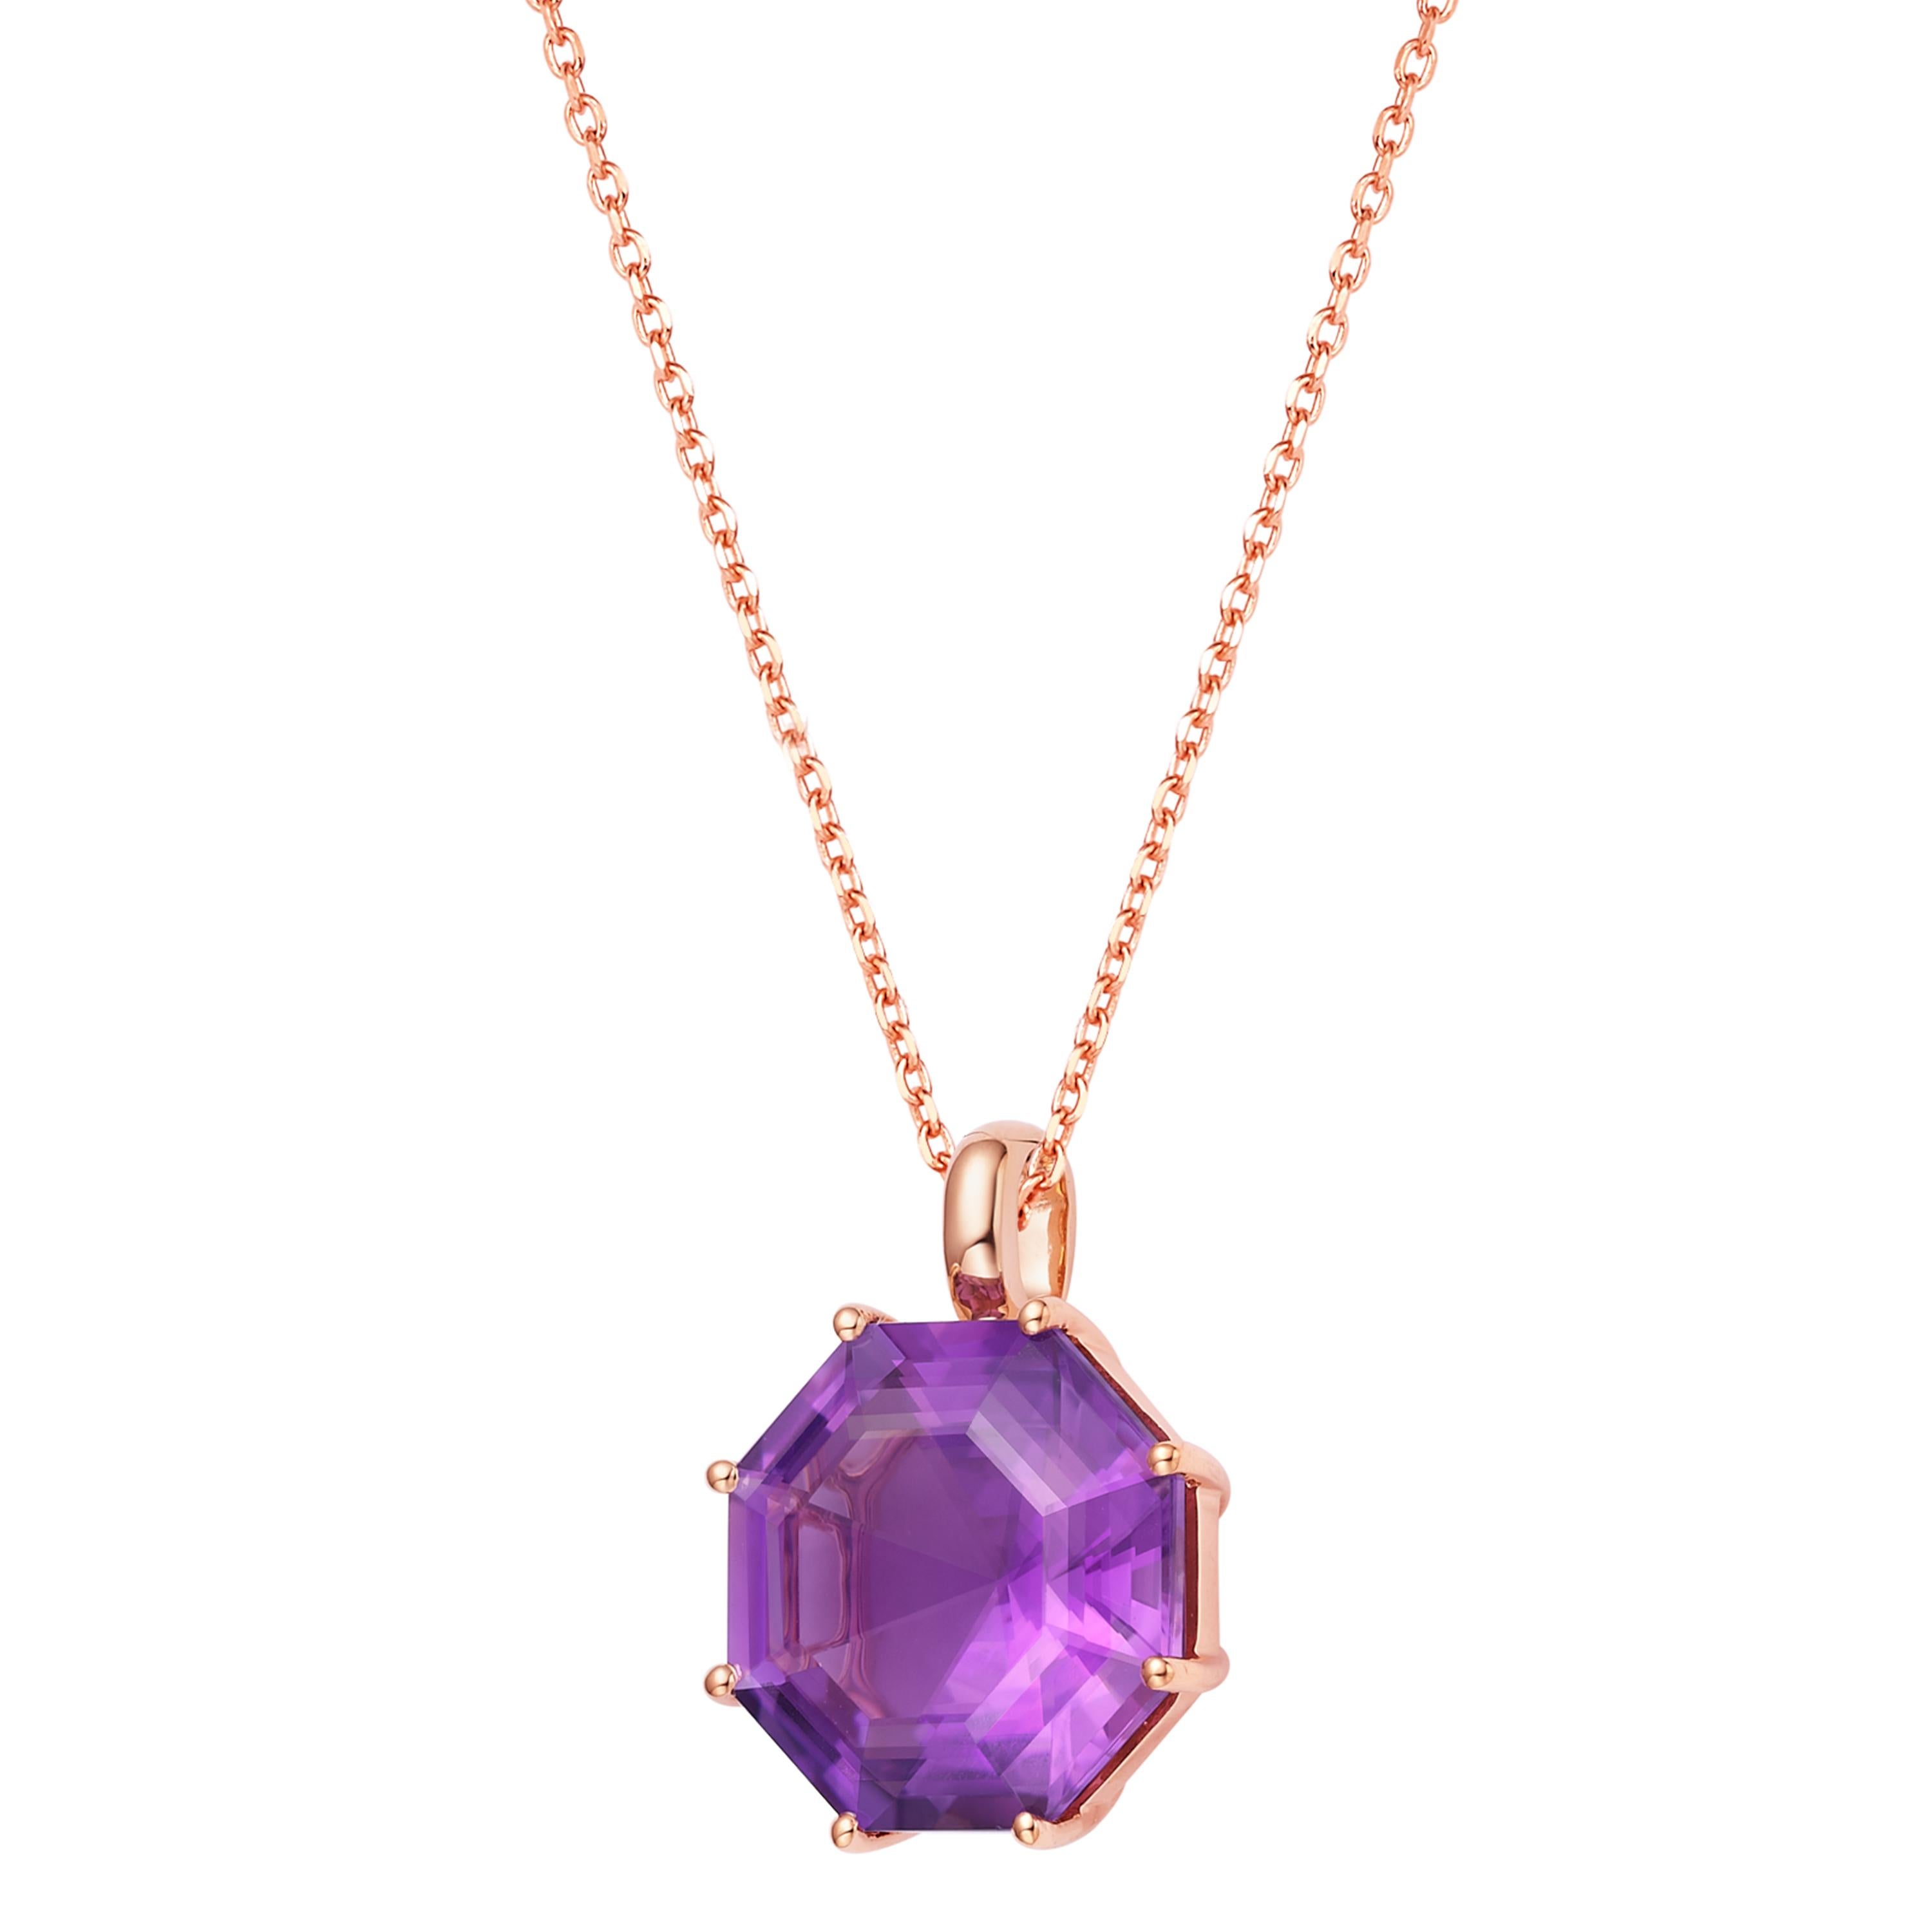 Description:
Victoriana small octagon pendant with 1.492ct purple amethyst Set in 18ct rose gold. Chain length is 16 inches + 2 inch extension.

Inspiration:
A deluxe 18ct gold collection inspired by Victorian design. Fei Liu’s Victoriana collection